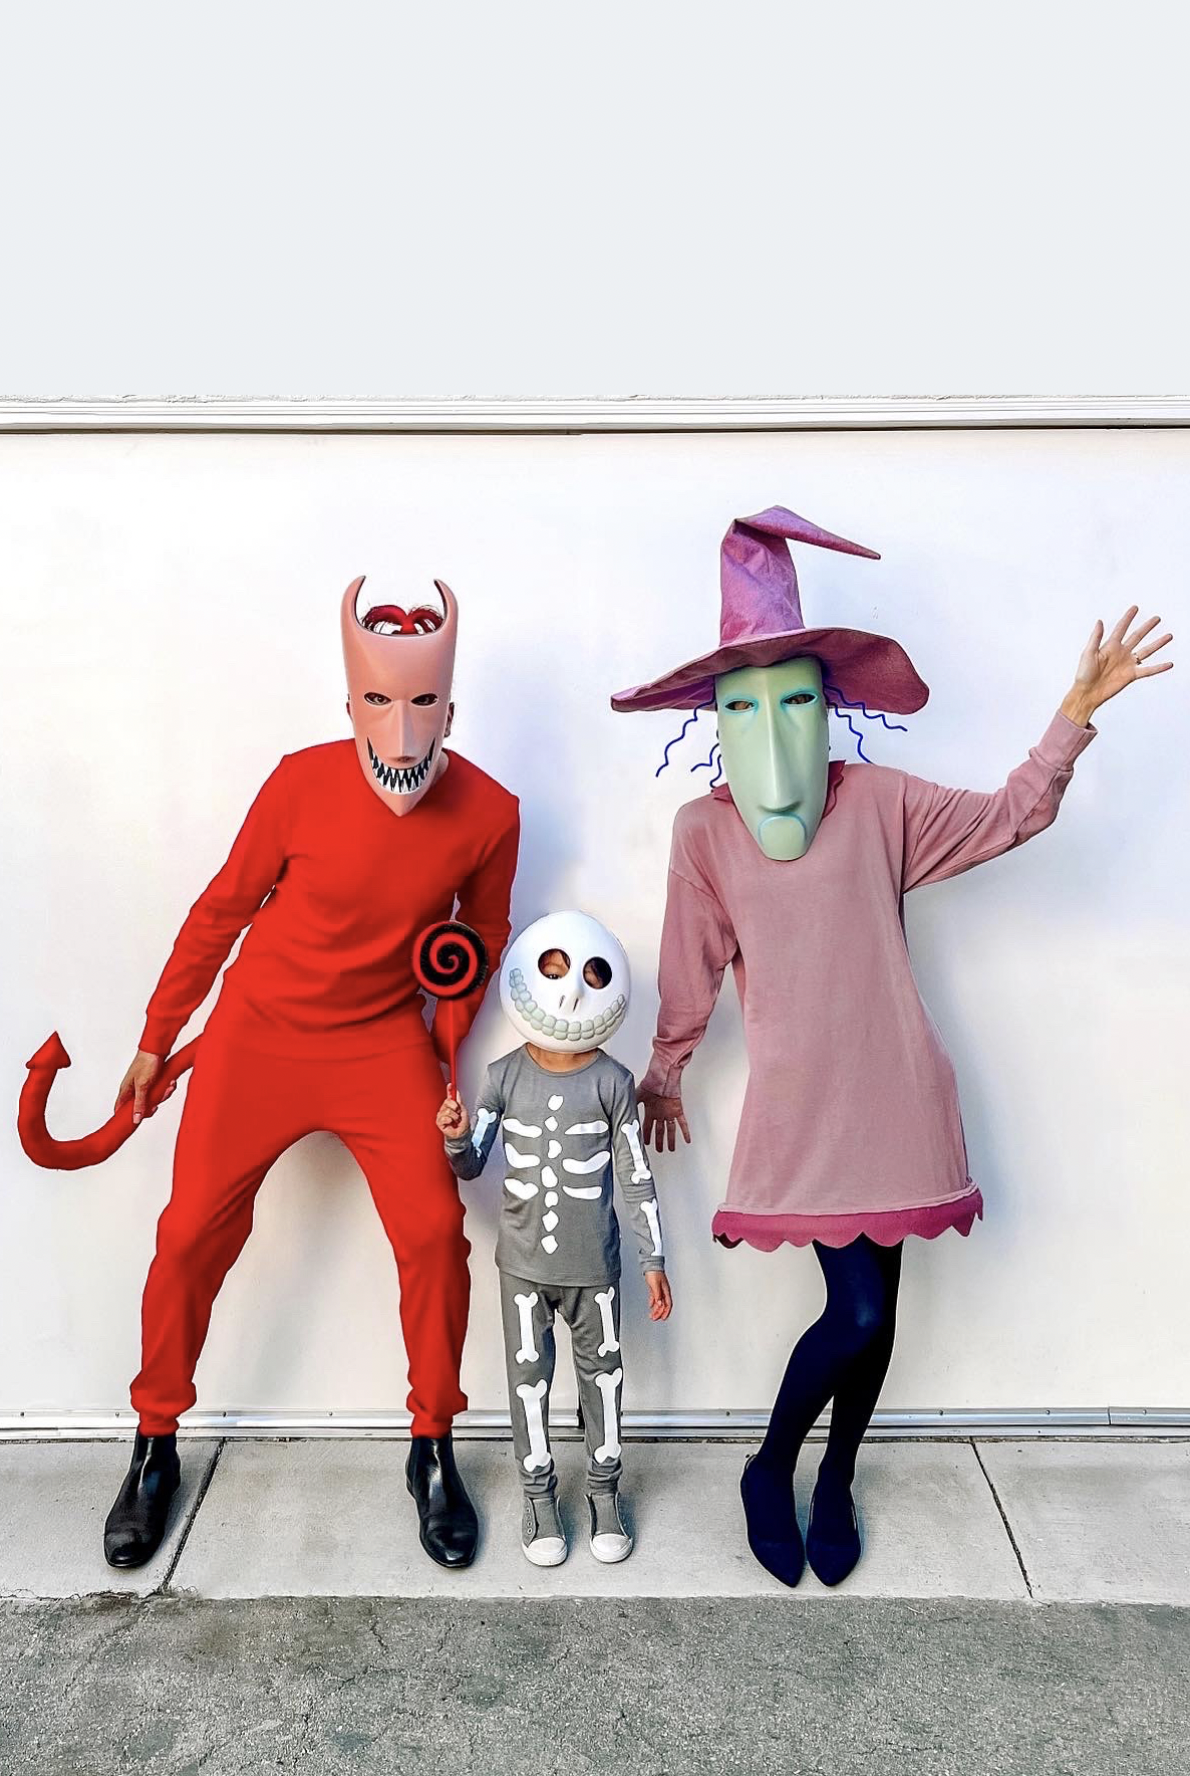 10 Adorable DIY Halloween Costumes for Toddlers | Designer Trapped